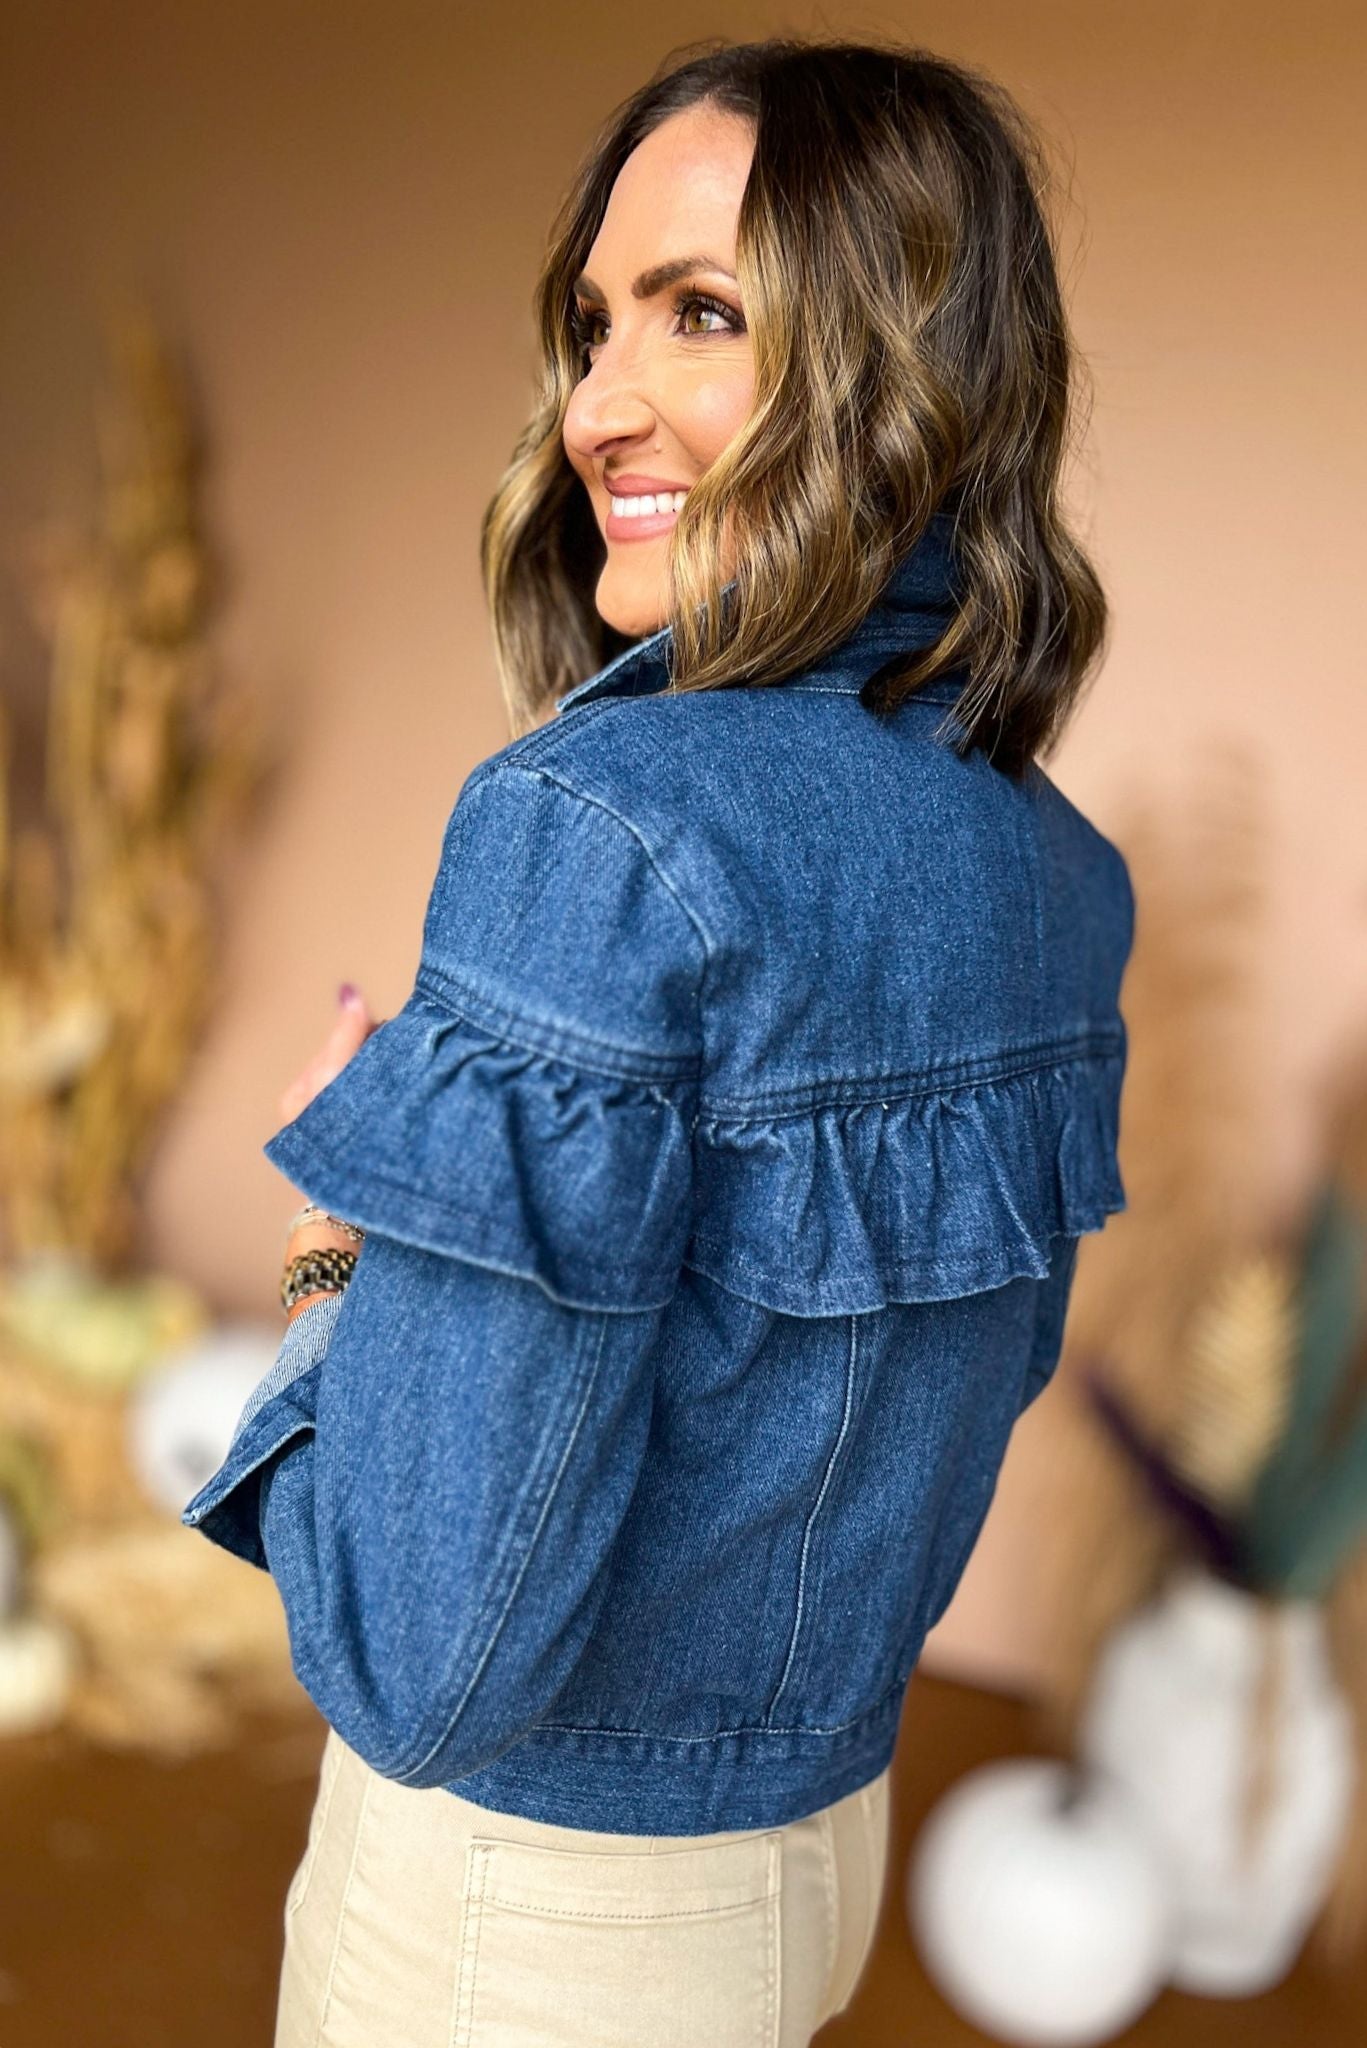 Blue Medium Wash Ruffle Button Front Denim Jacket, must have jacket, must have style, fall style, fall fashion, denim jcket, elevated style, fall collection, shop style your senses by mallory fitzsimmons